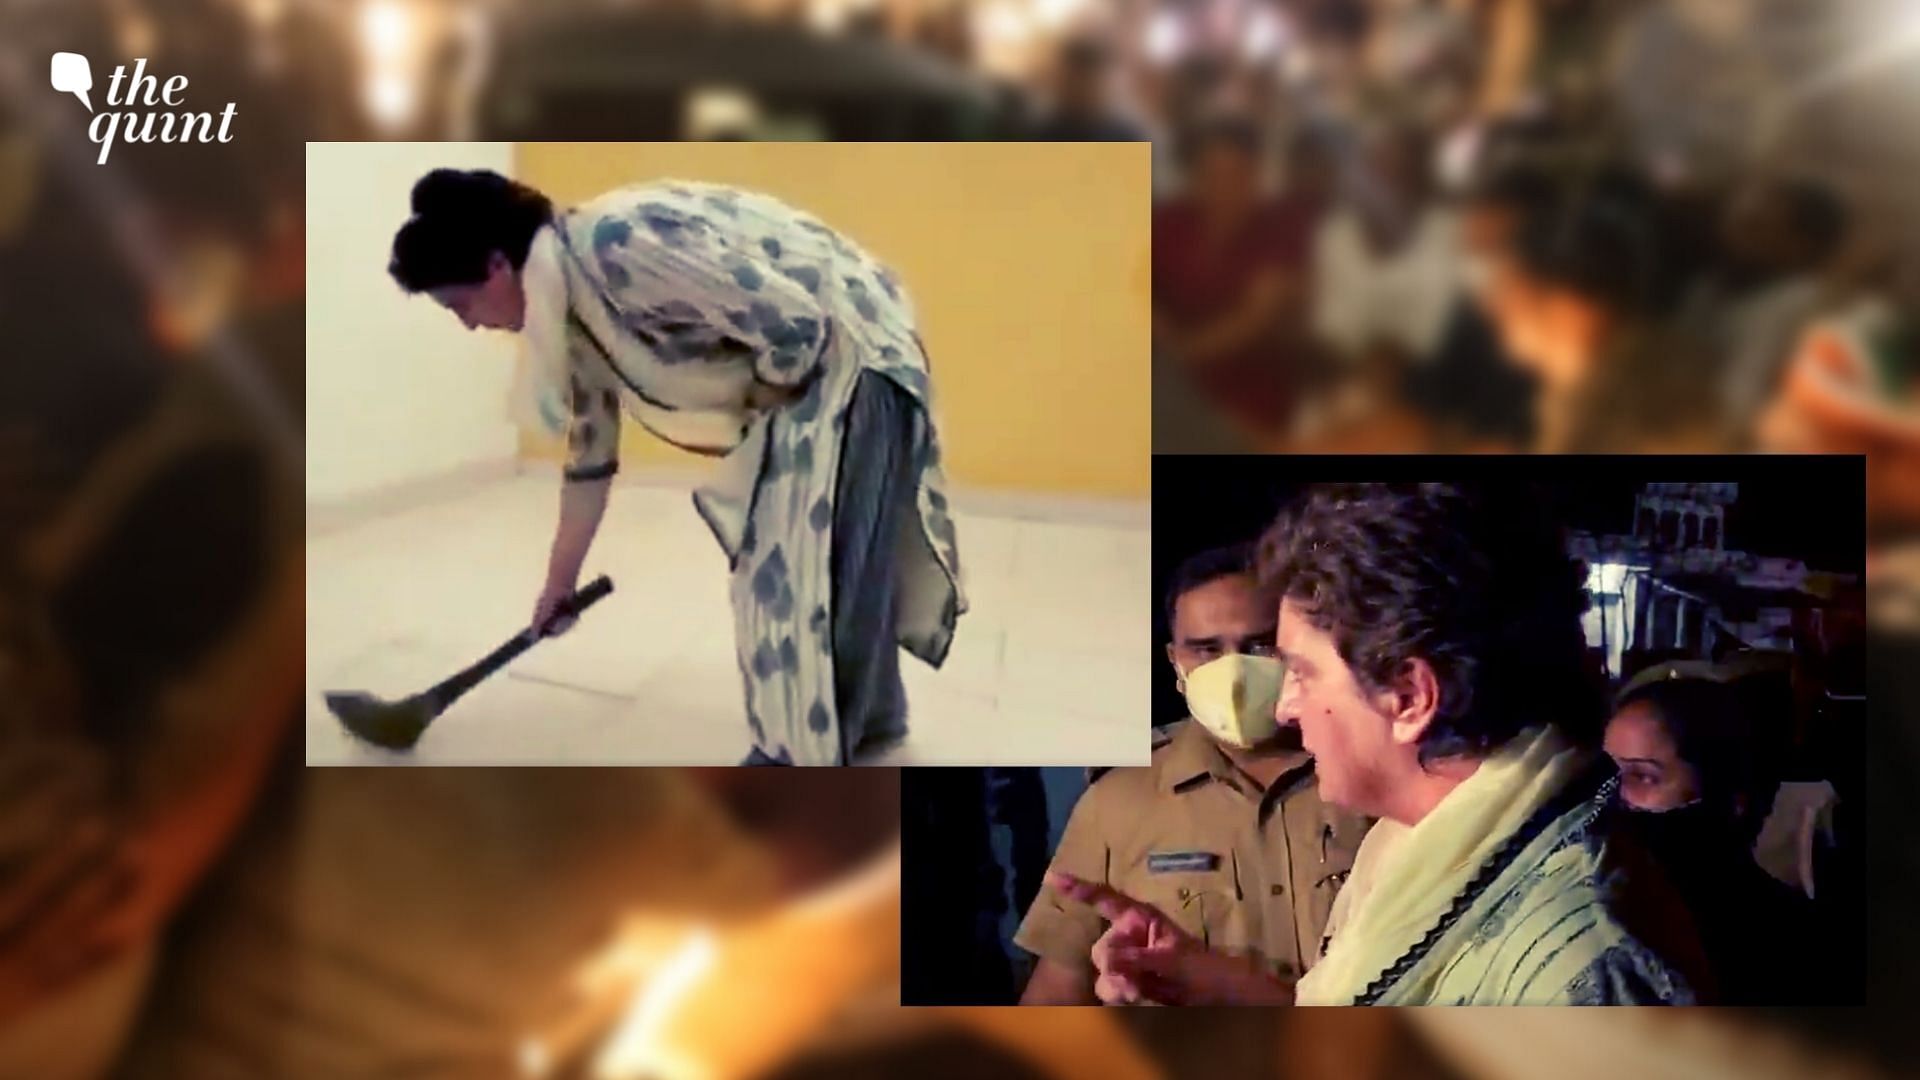 <div class="paragraphs"><p>Congress leader Priyanka Gandhi Vadra could be seen sweeping the floor of the room in which she has been detained.&nbsp;</p></div>